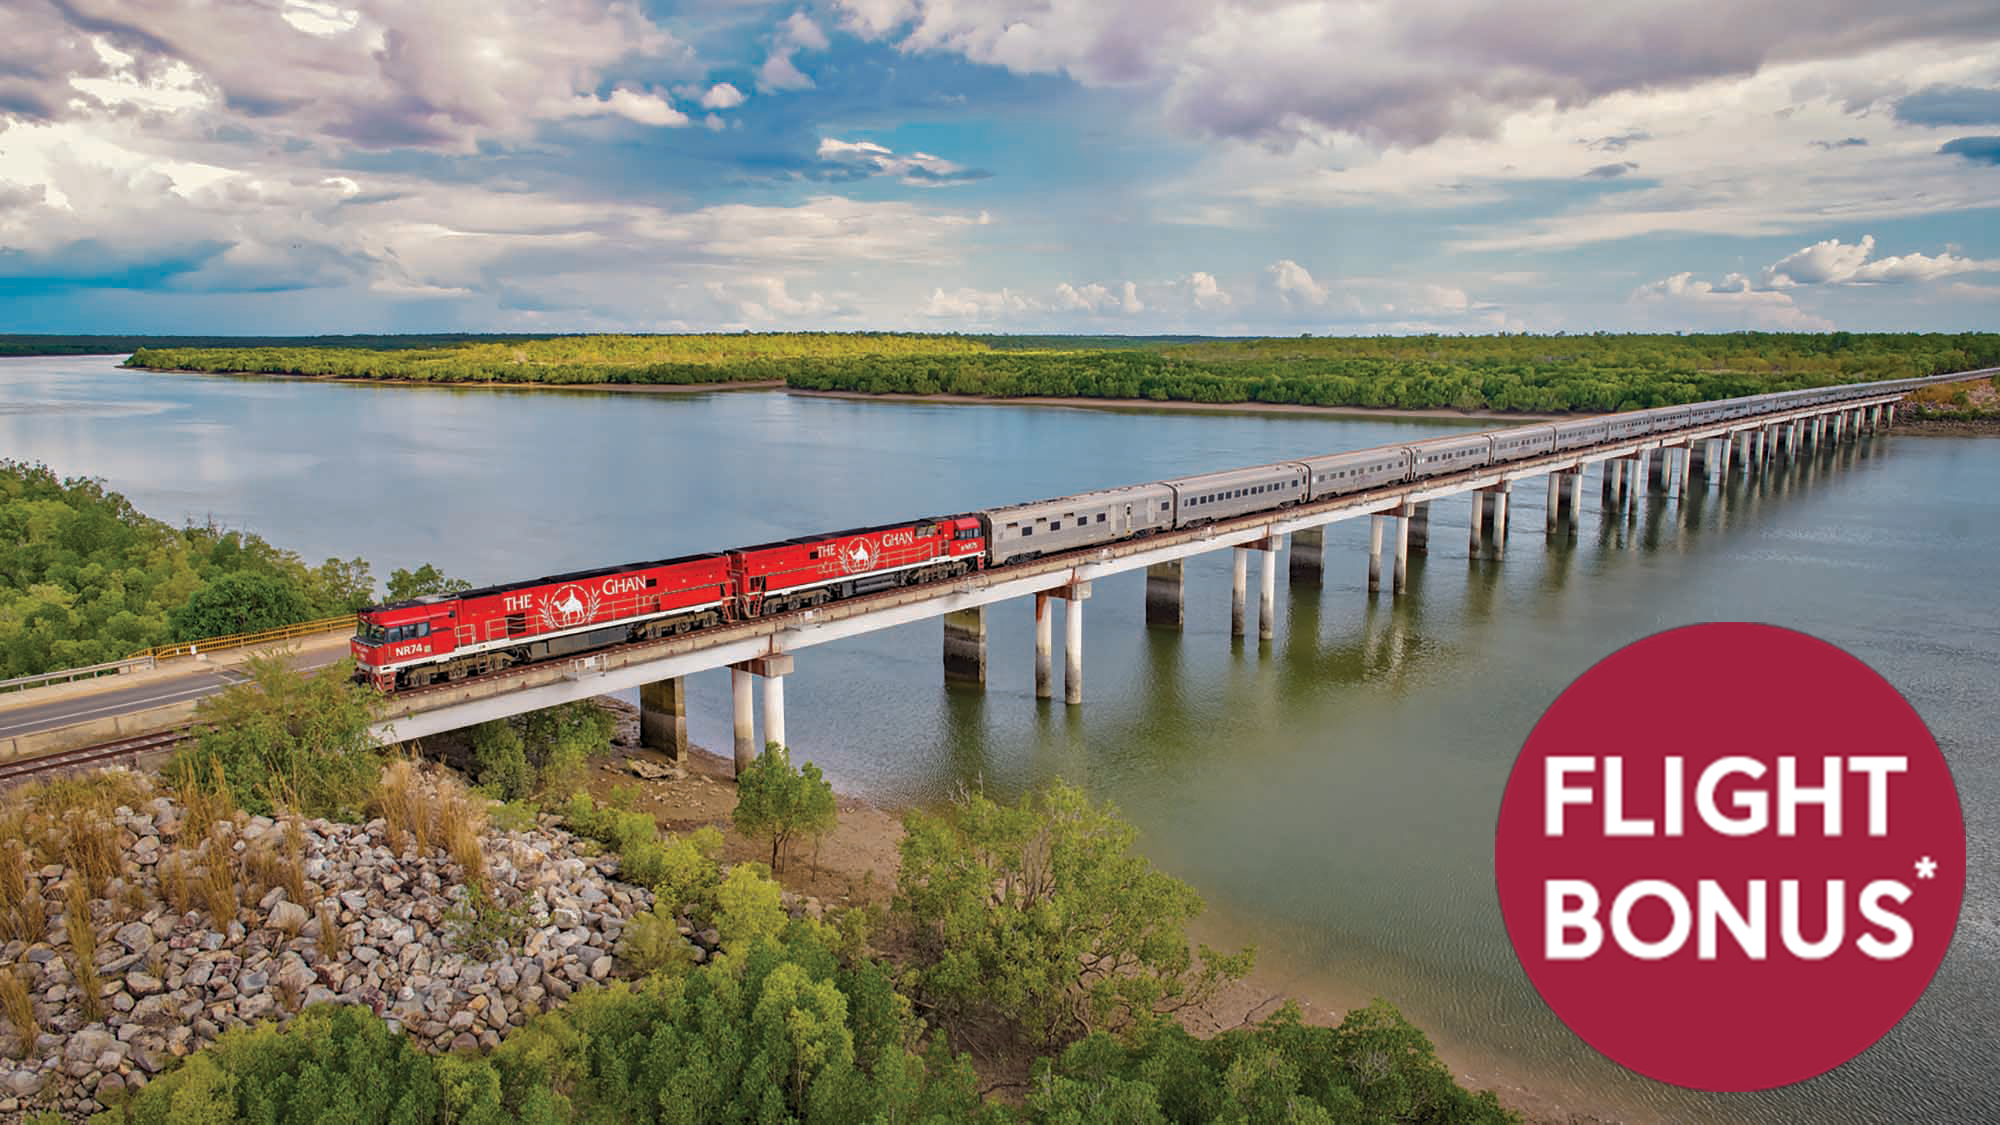 Darwin, Litchfield & Kakadu Escape with the Ghan Expedition - NT Now